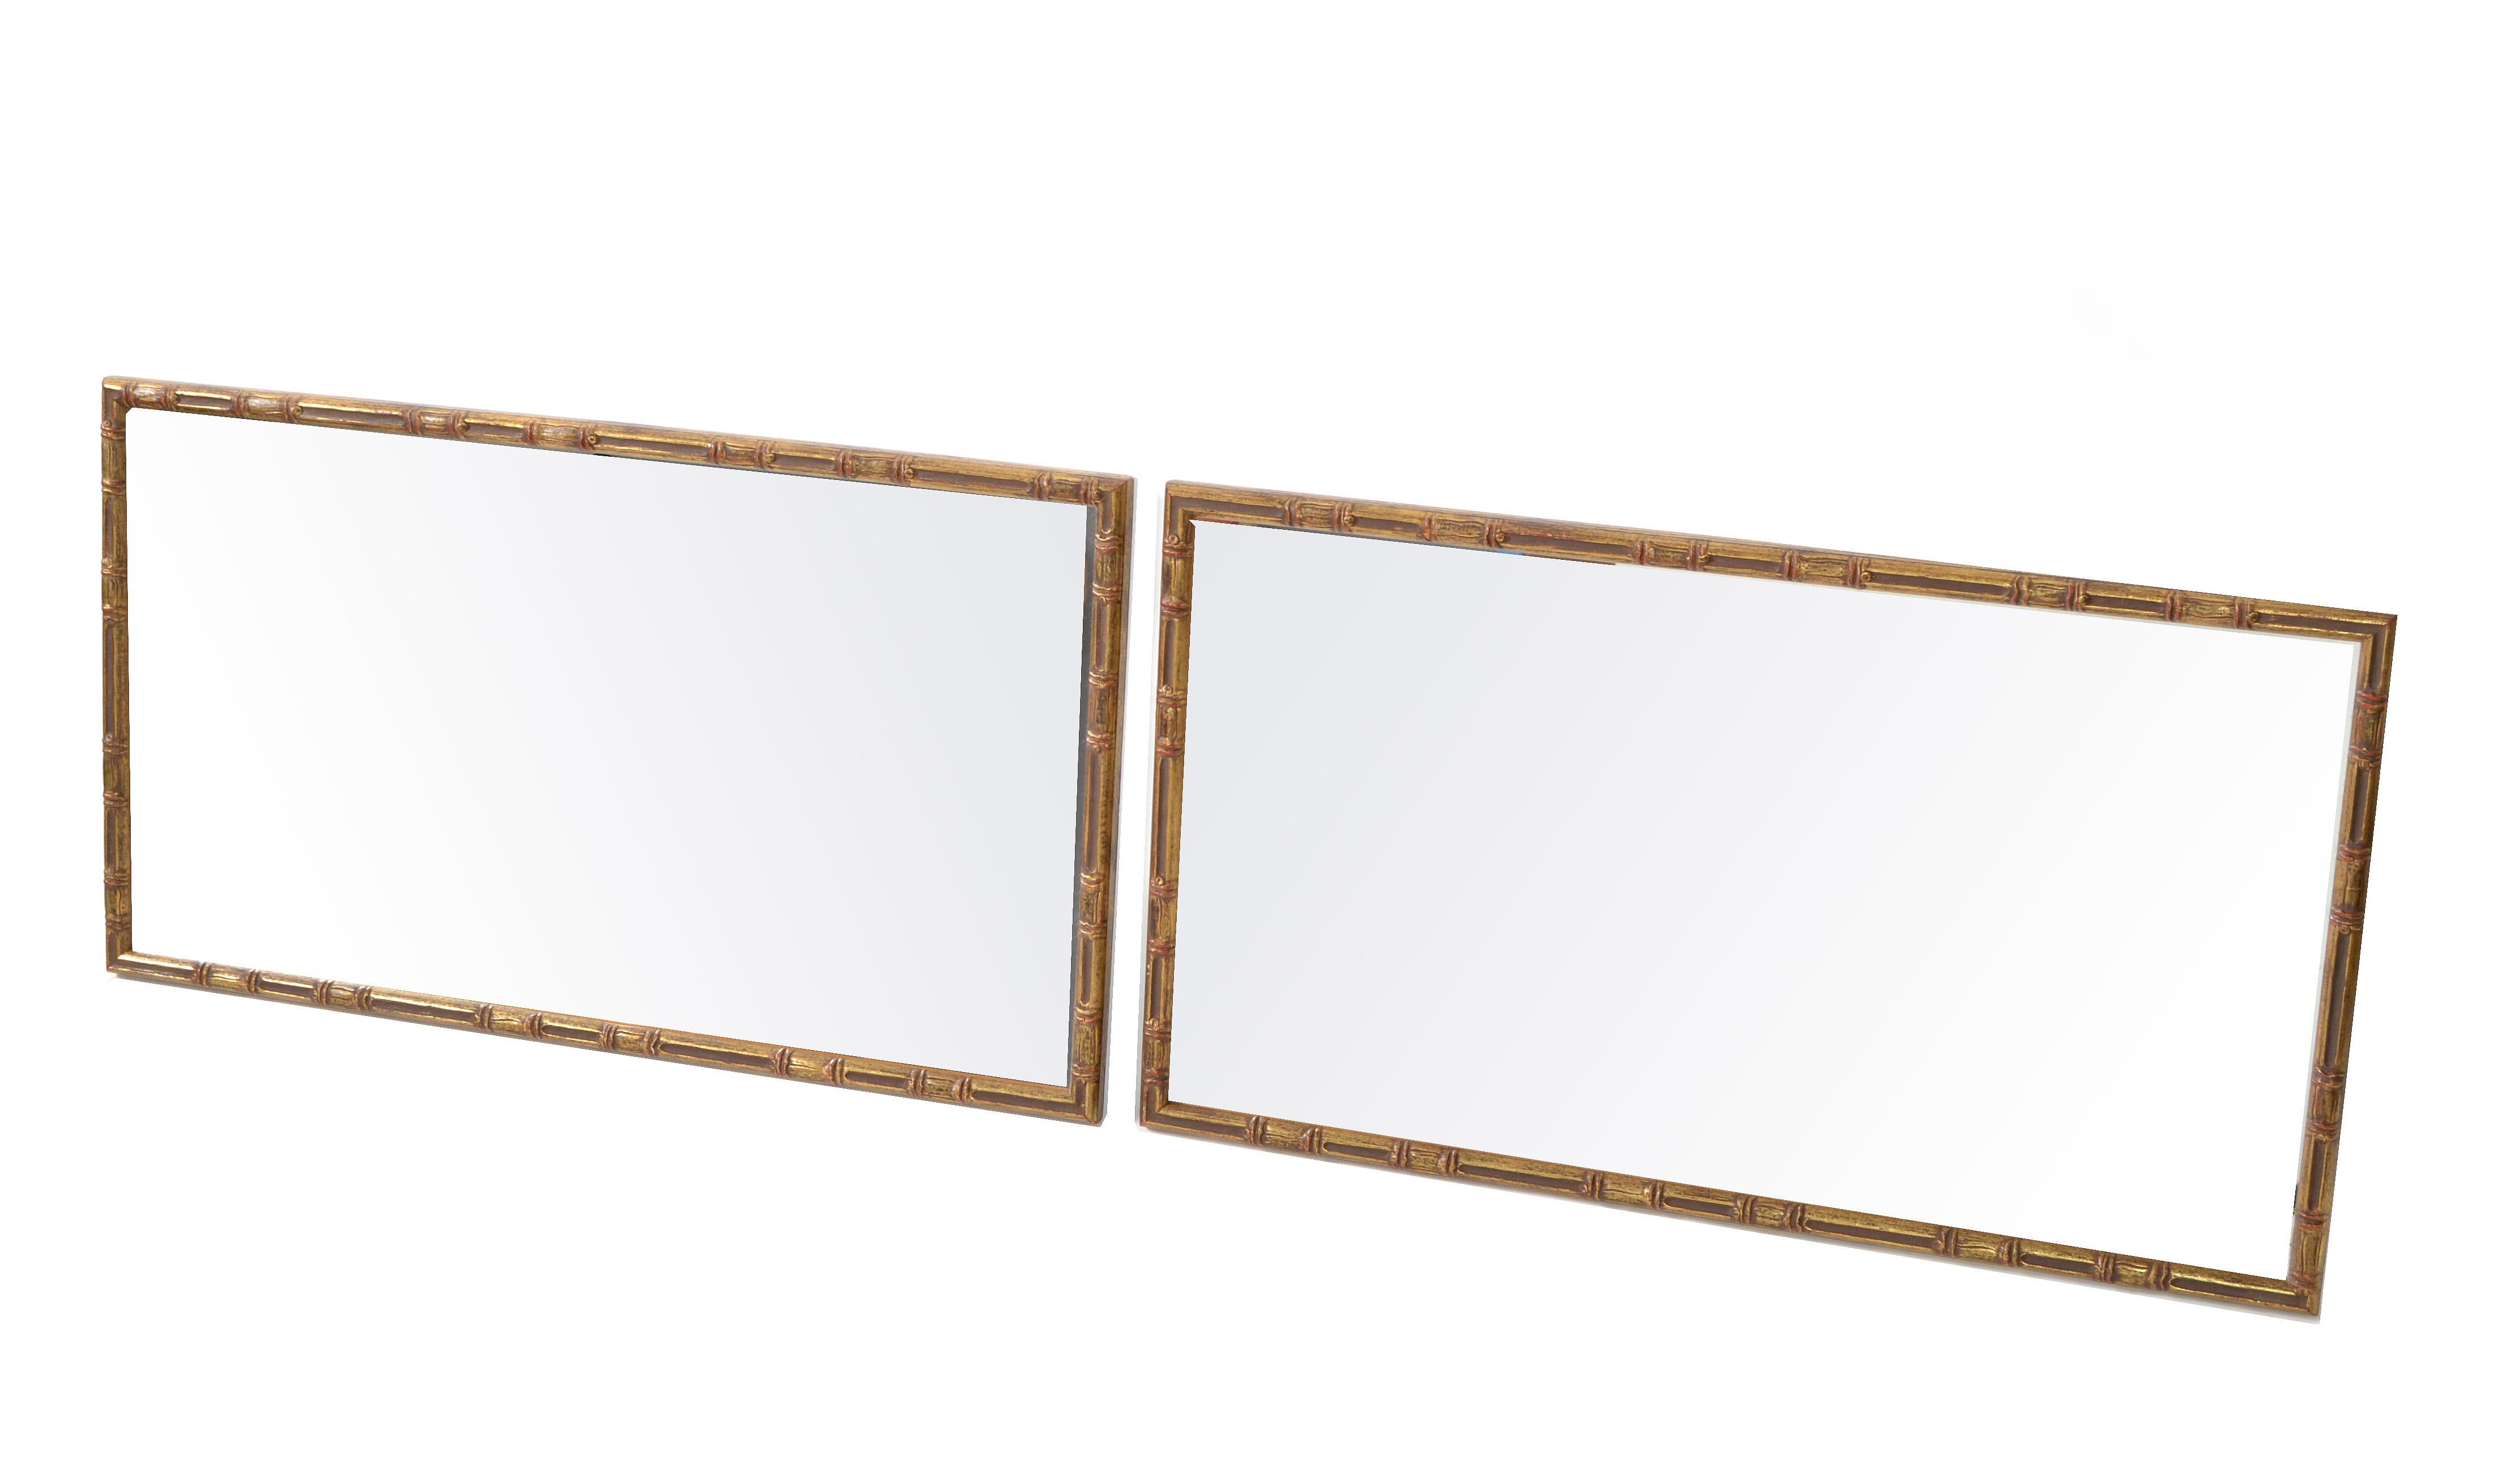 Gorgeous pair of wall mirrors in gilt finish faux bamboo.
Can be hung vertical.
Mirror Size: 14.25 x 26.25 inches.